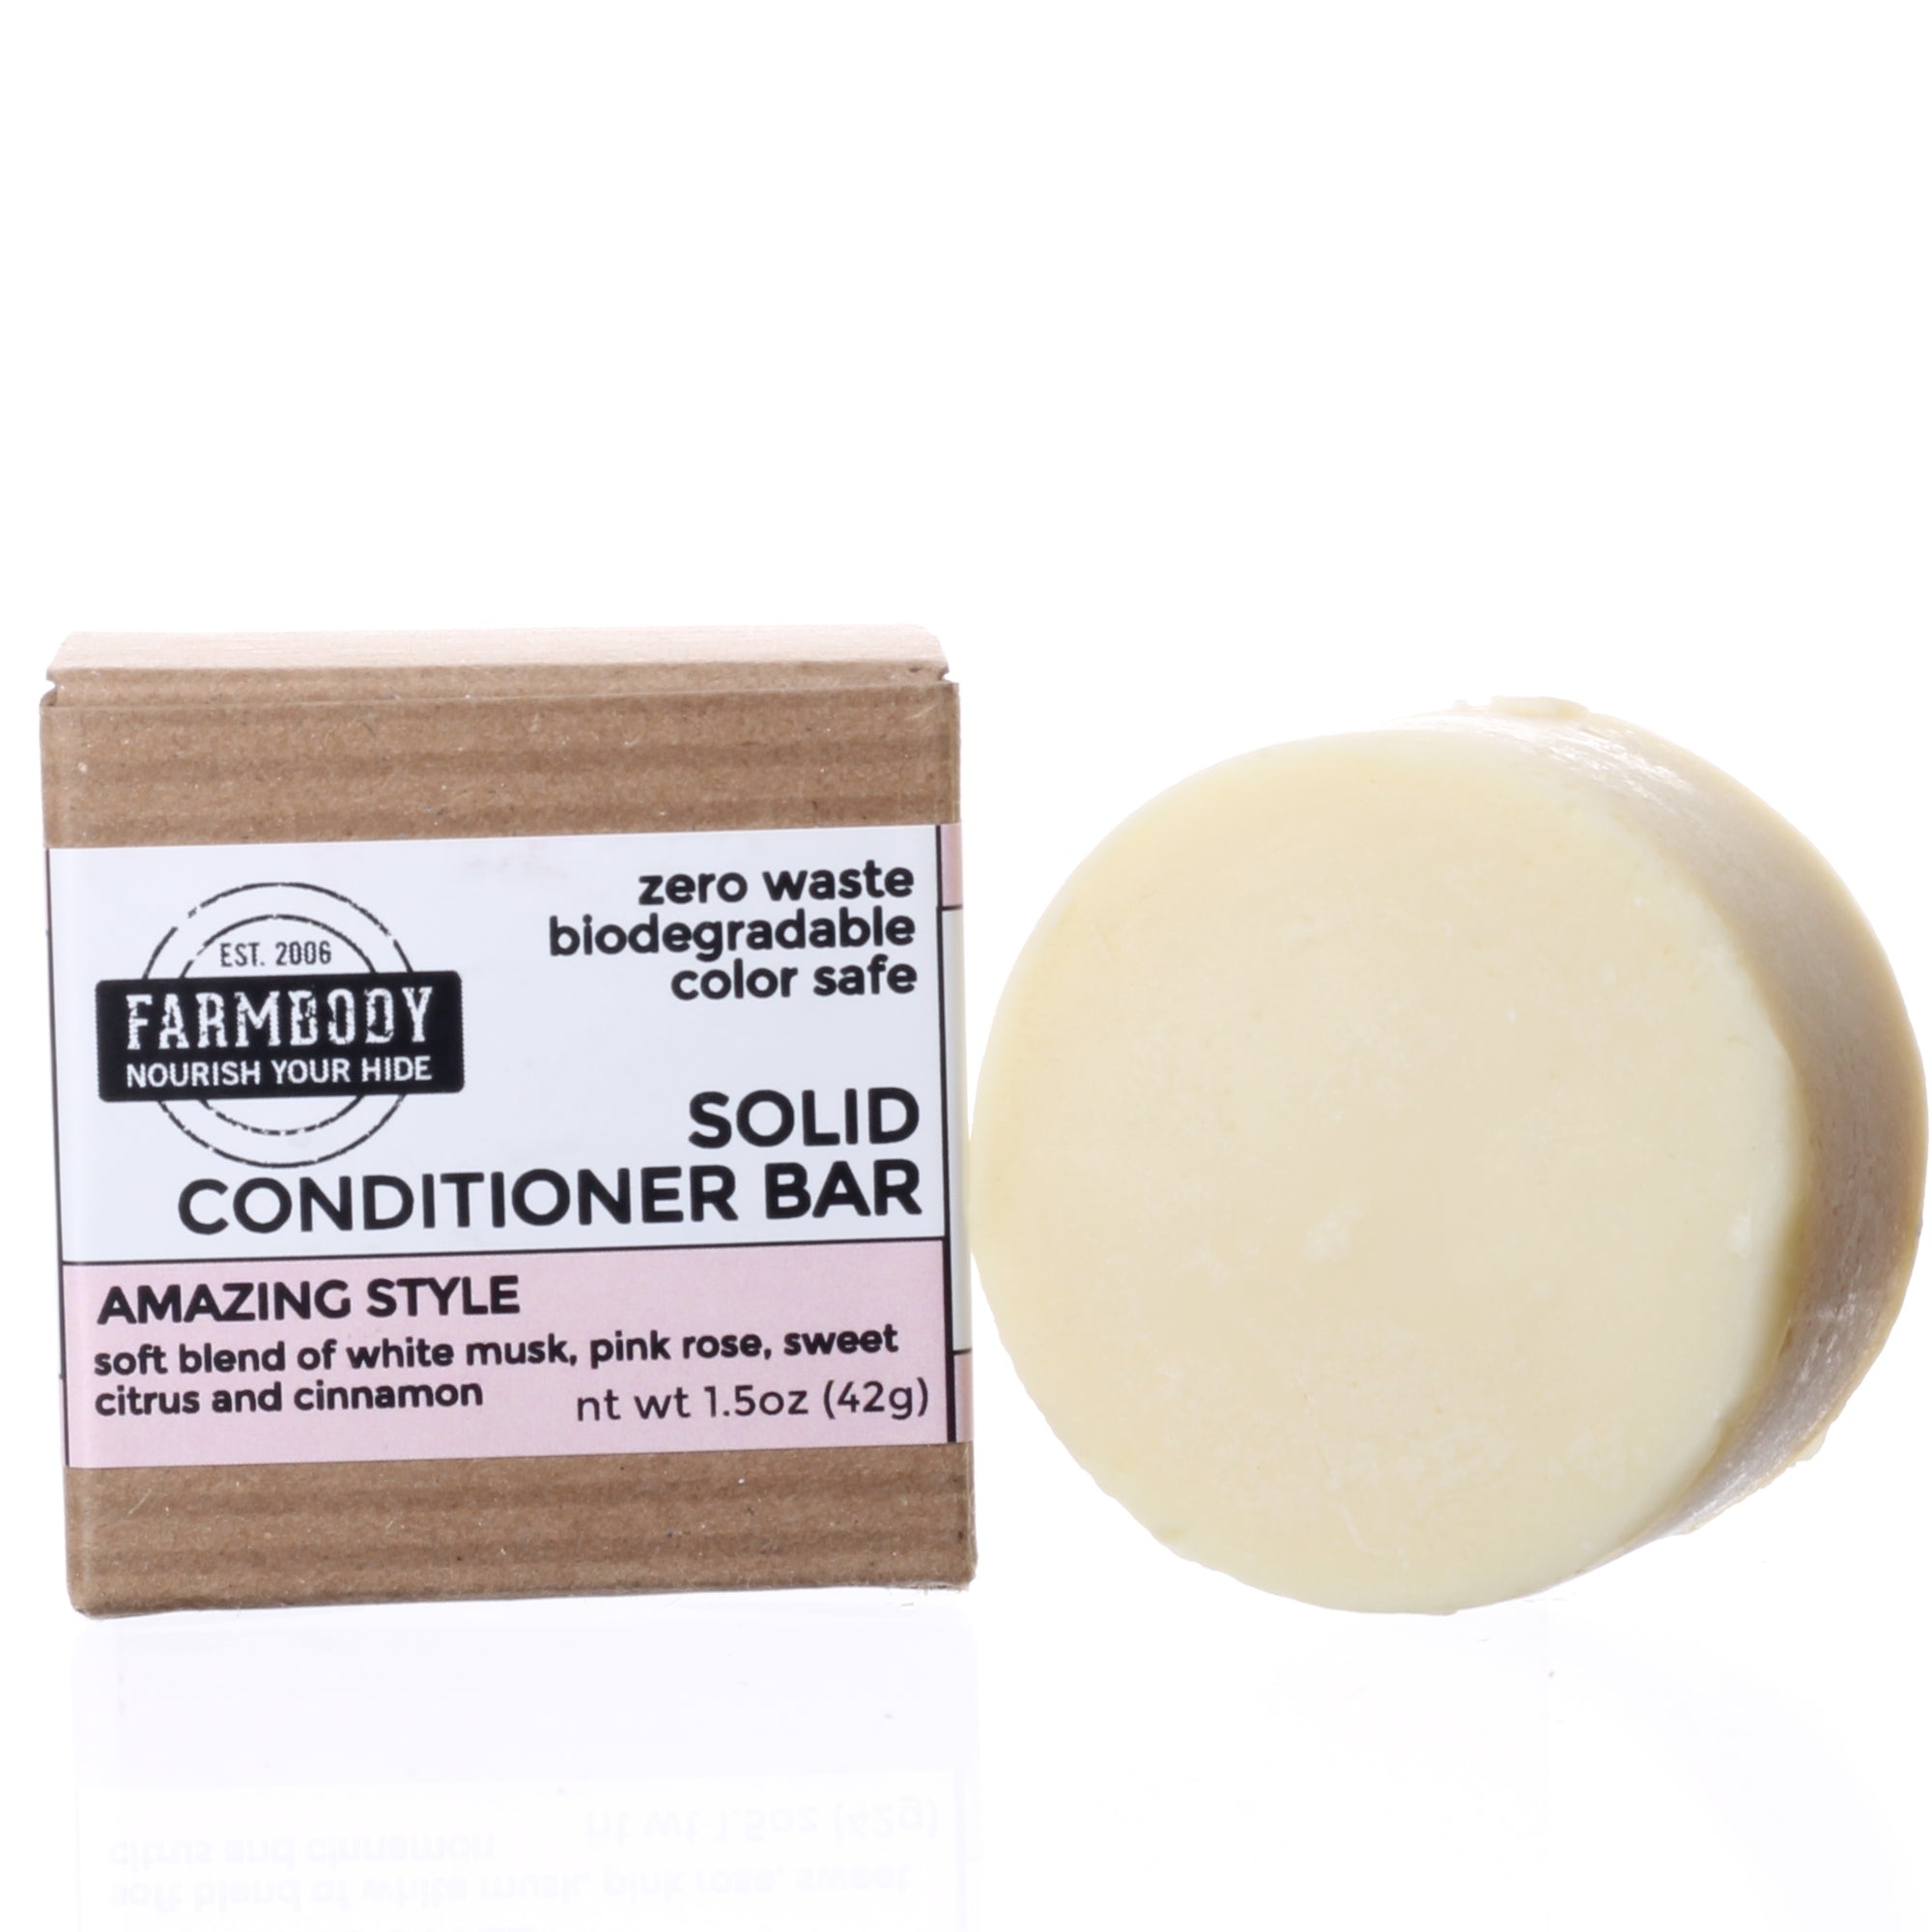 Farmbody zero waste solid conditioner bar in amazing style fragrance for all hair types